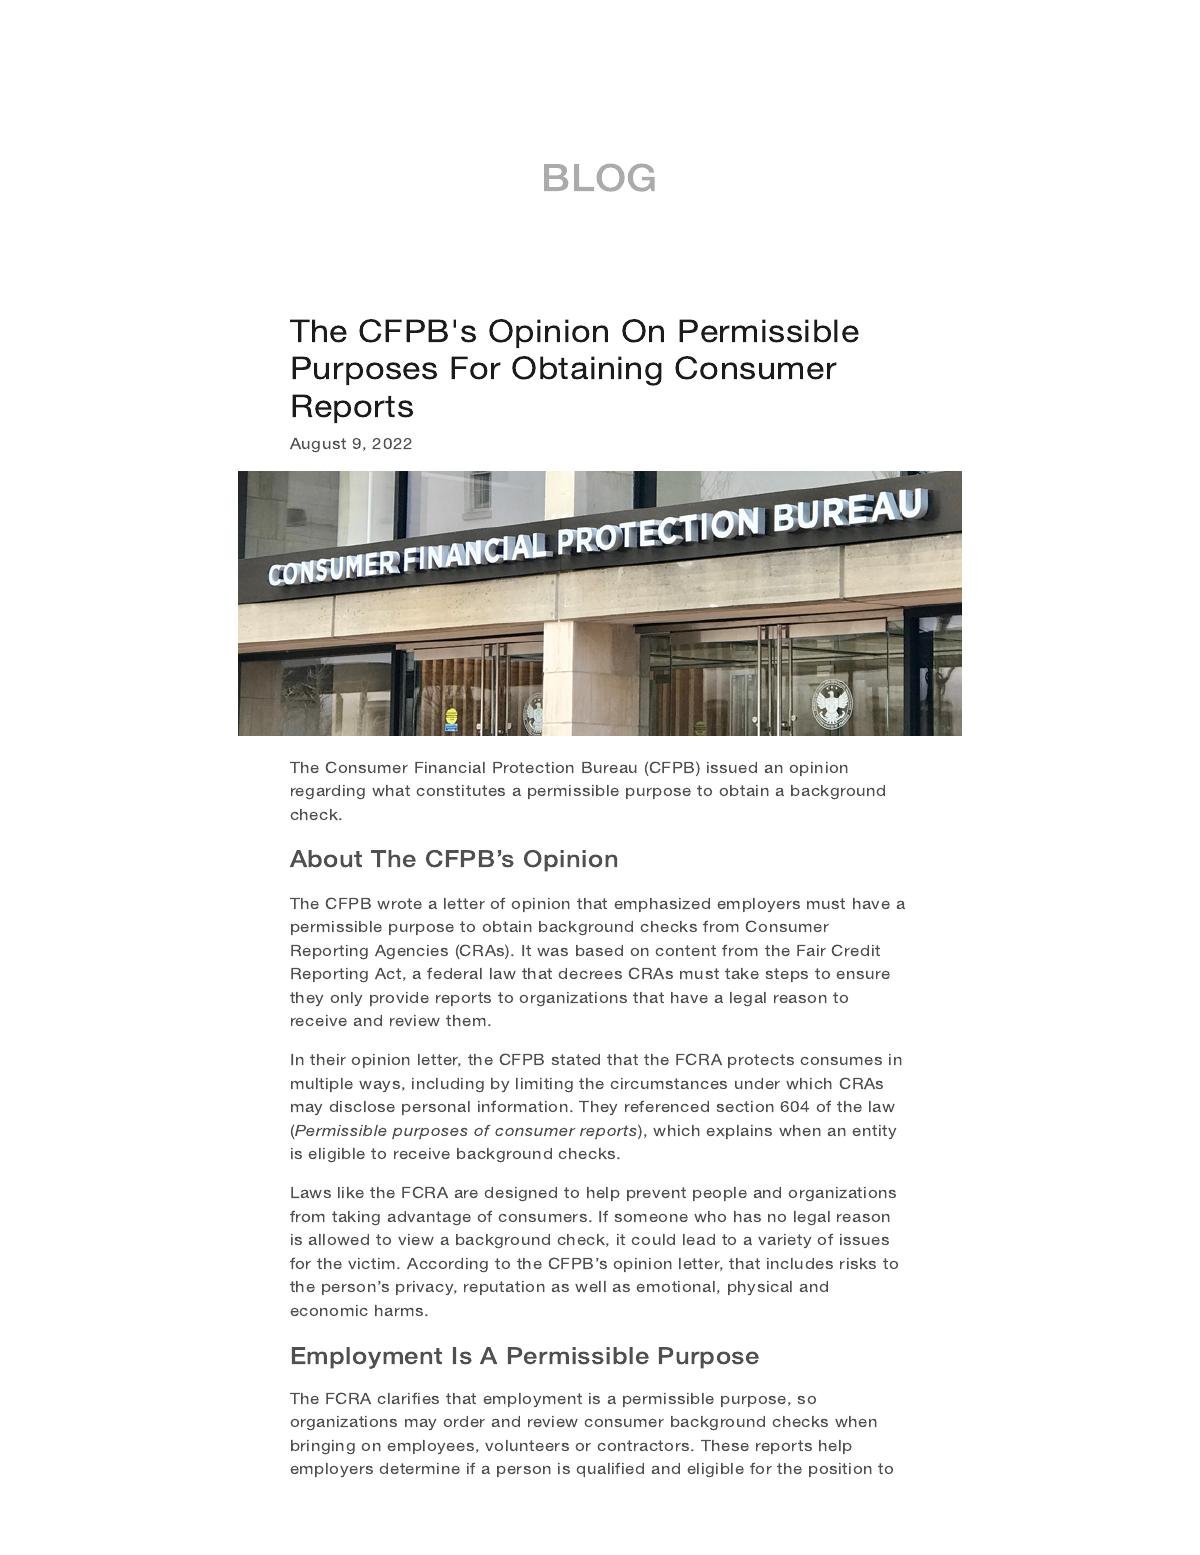 The CFPB's Opinion On Permissible Purposes For Obtaining Consumer Reports - Backgrounds Online BLOG